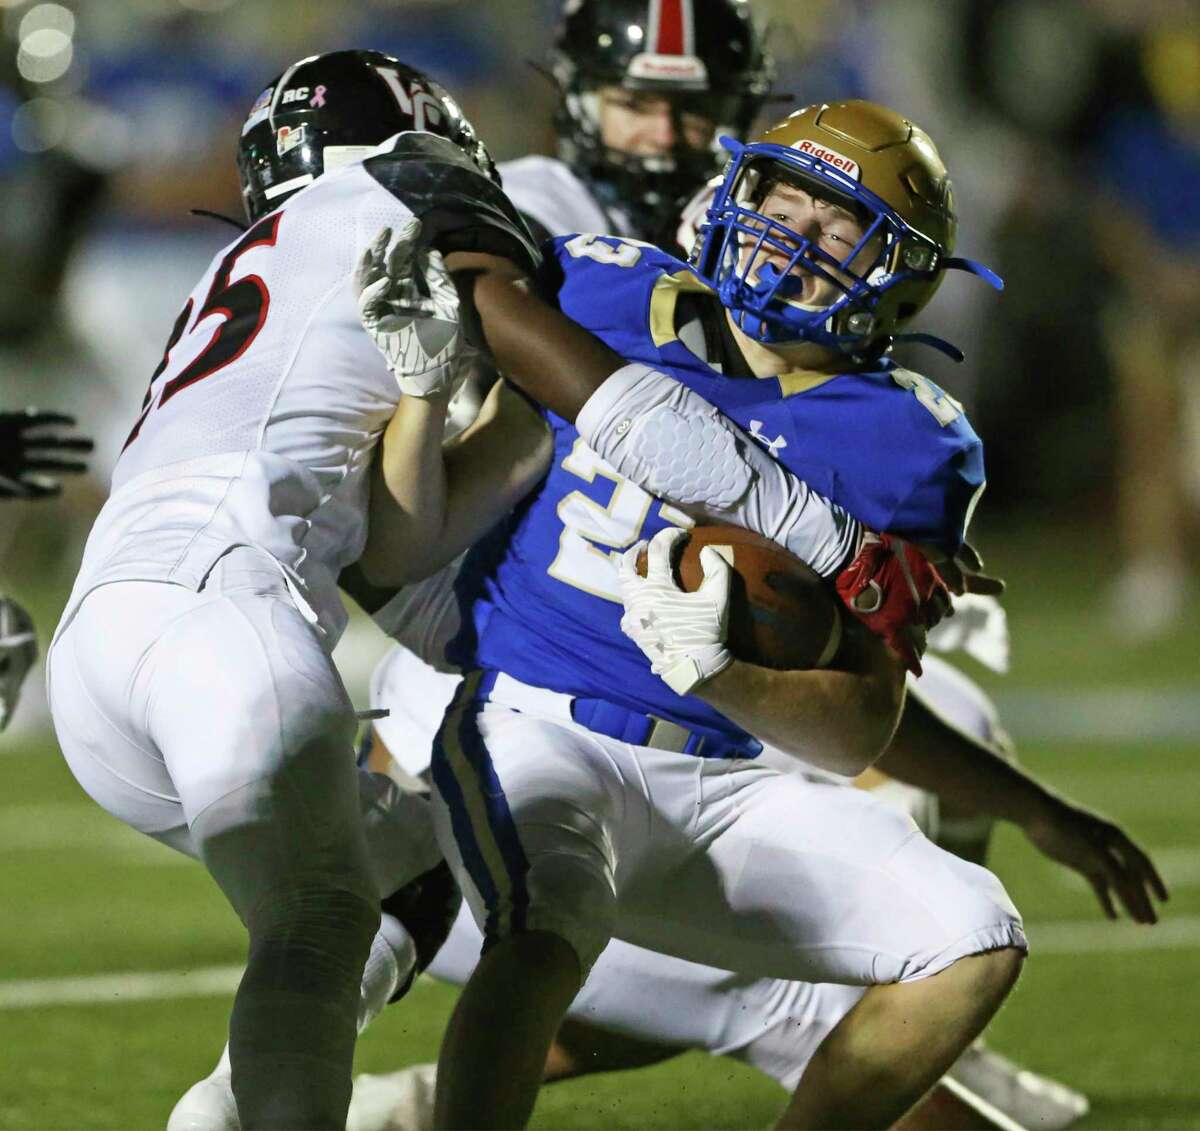 Mule running back George Flesher is brought down hard by Marshall Perez (25) as Alamo Heights hosts Churchill at Commalander Stadium on Oct. 1, 2020.